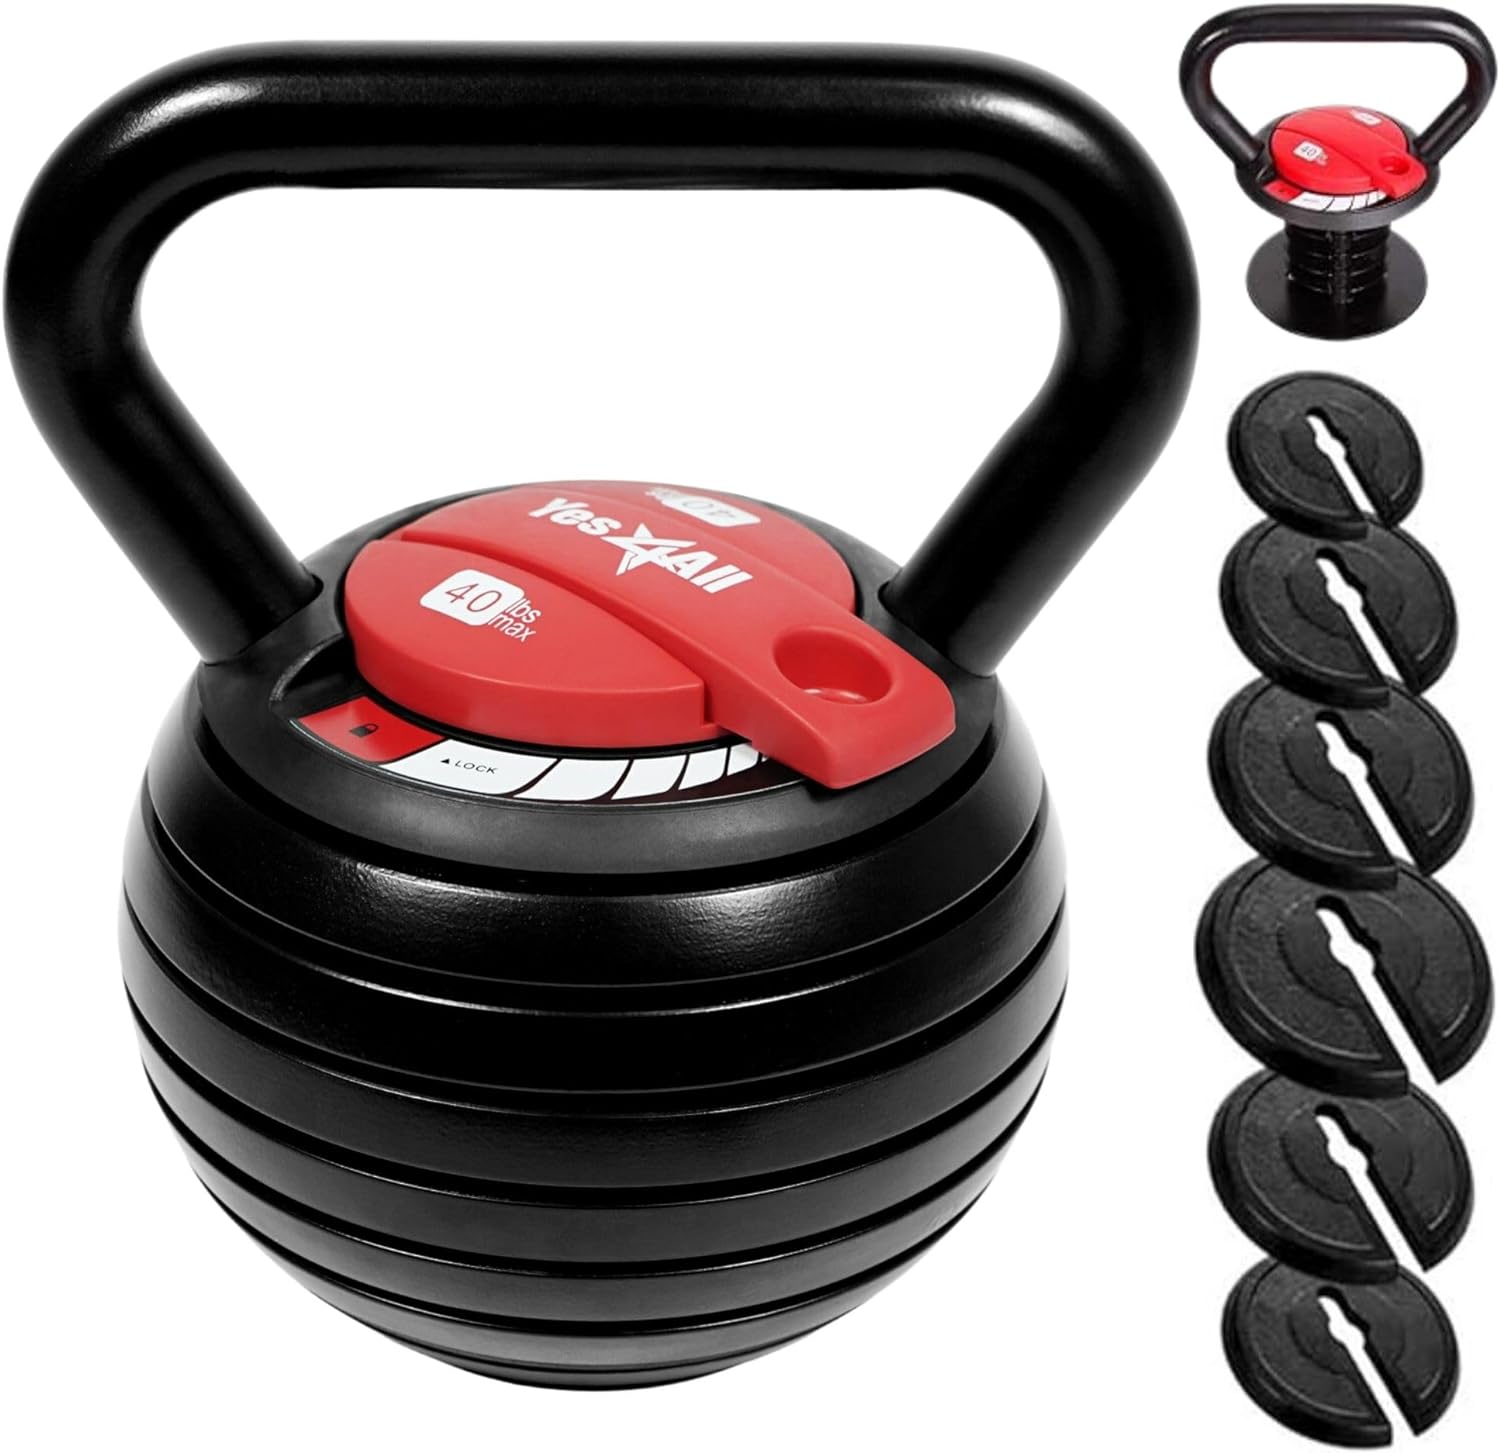 Yes4All 10-40lb Adjustable Kettlebell Weights, Red Color - image 1 of 4